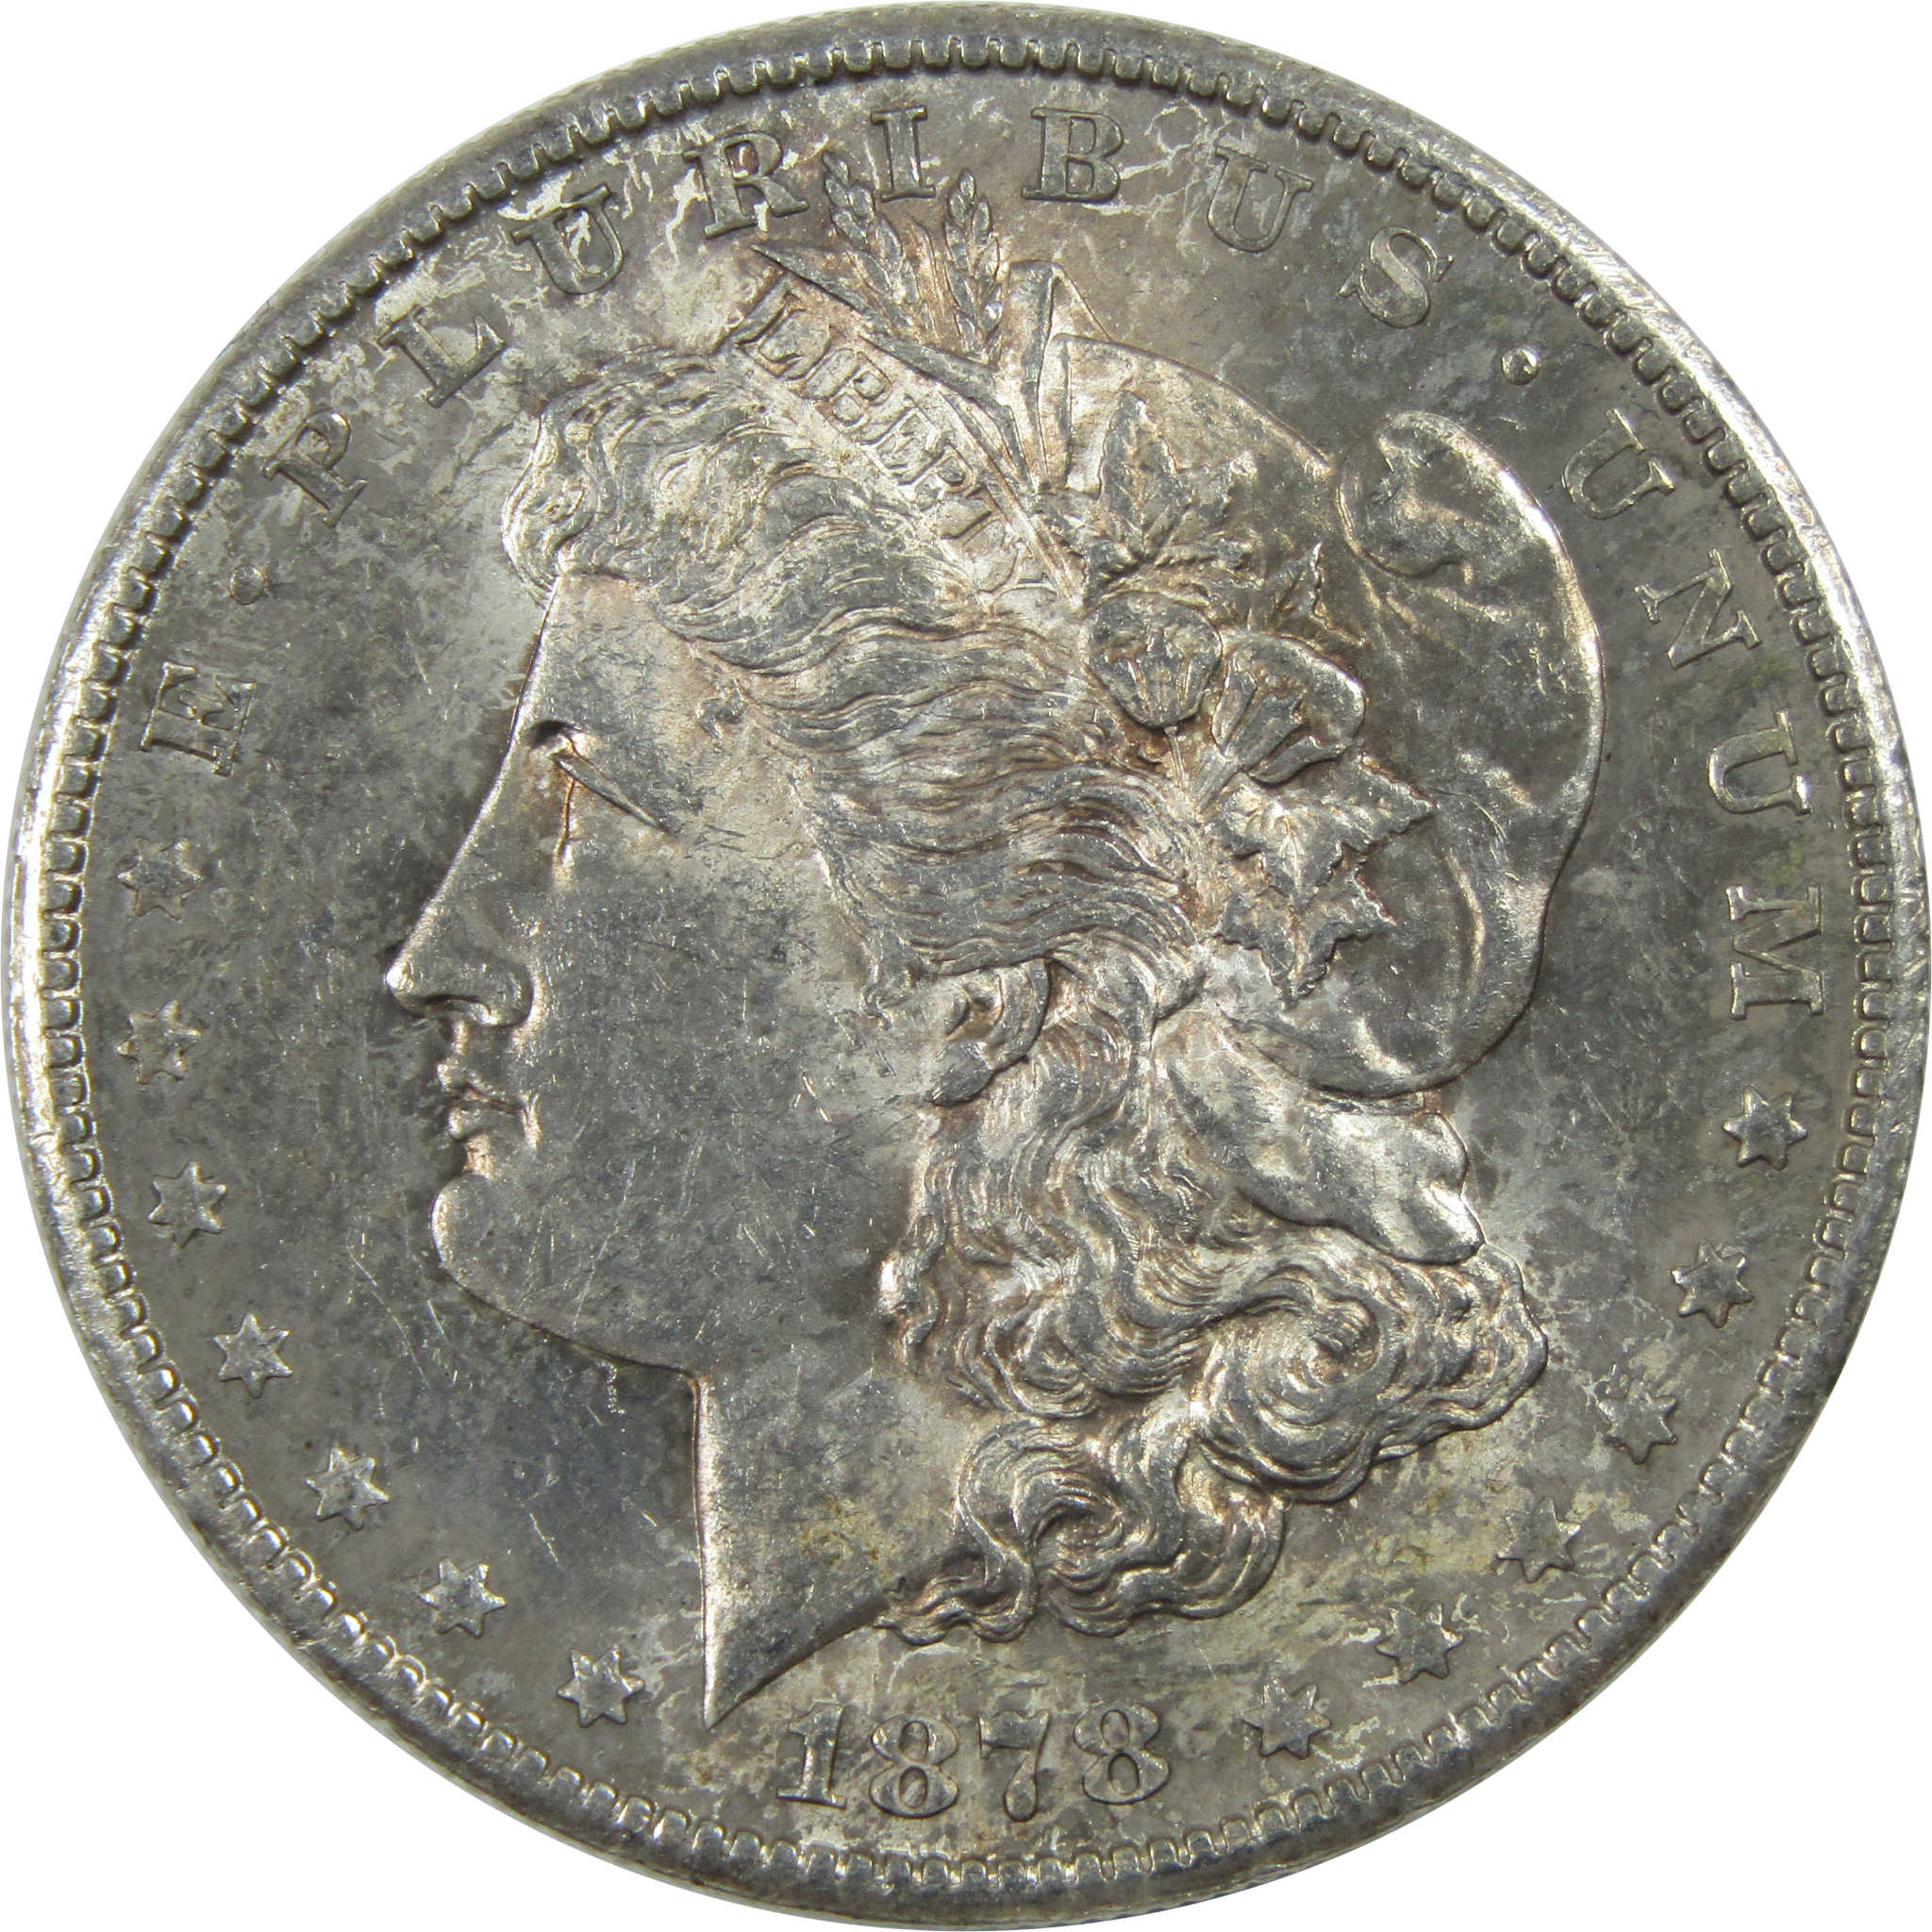 1878 S Morgan Dollar AU About Uncirculated Silver $1 Coin SKU:I11684 - Morgan coin - Morgan silver dollar - Morgan silver dollar for sale - Profile Coins &amp; Collectibles